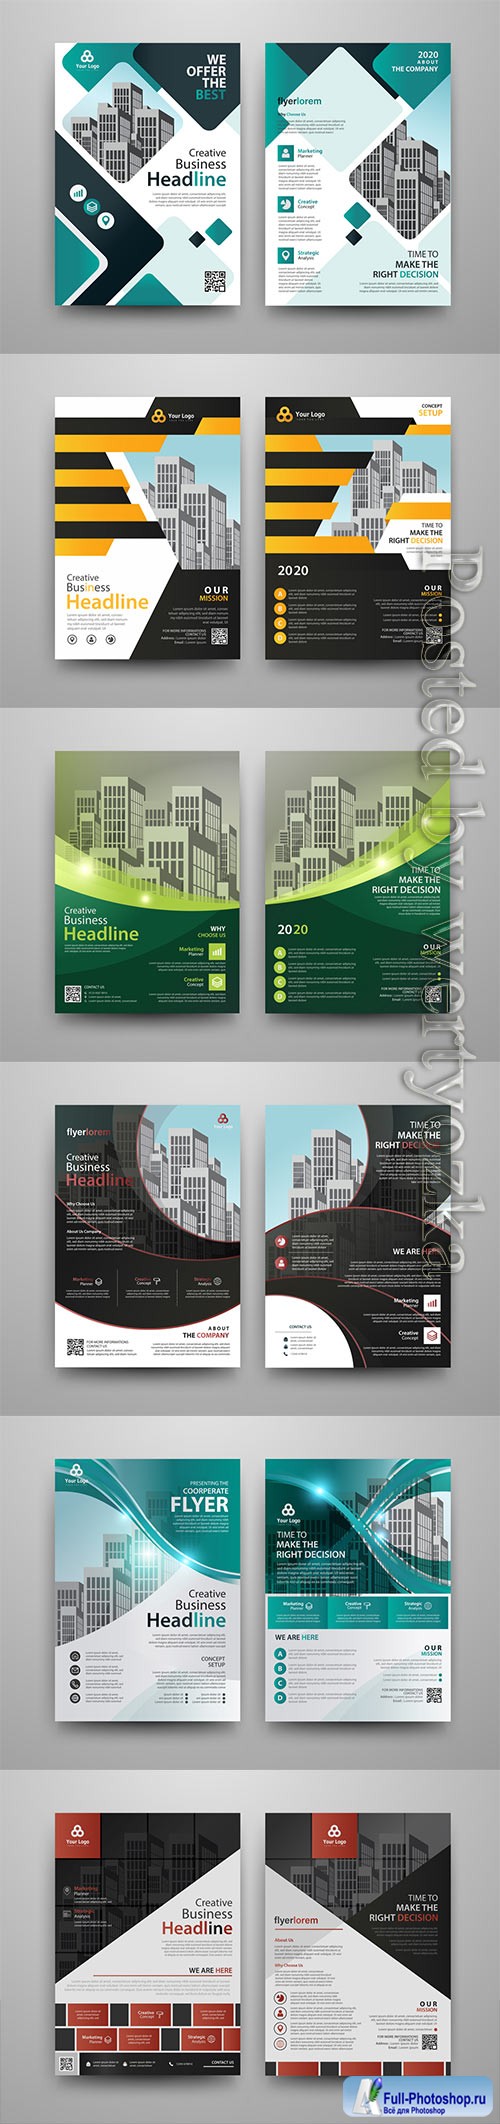 Business vector template for brochure, annual report, magazine # 19